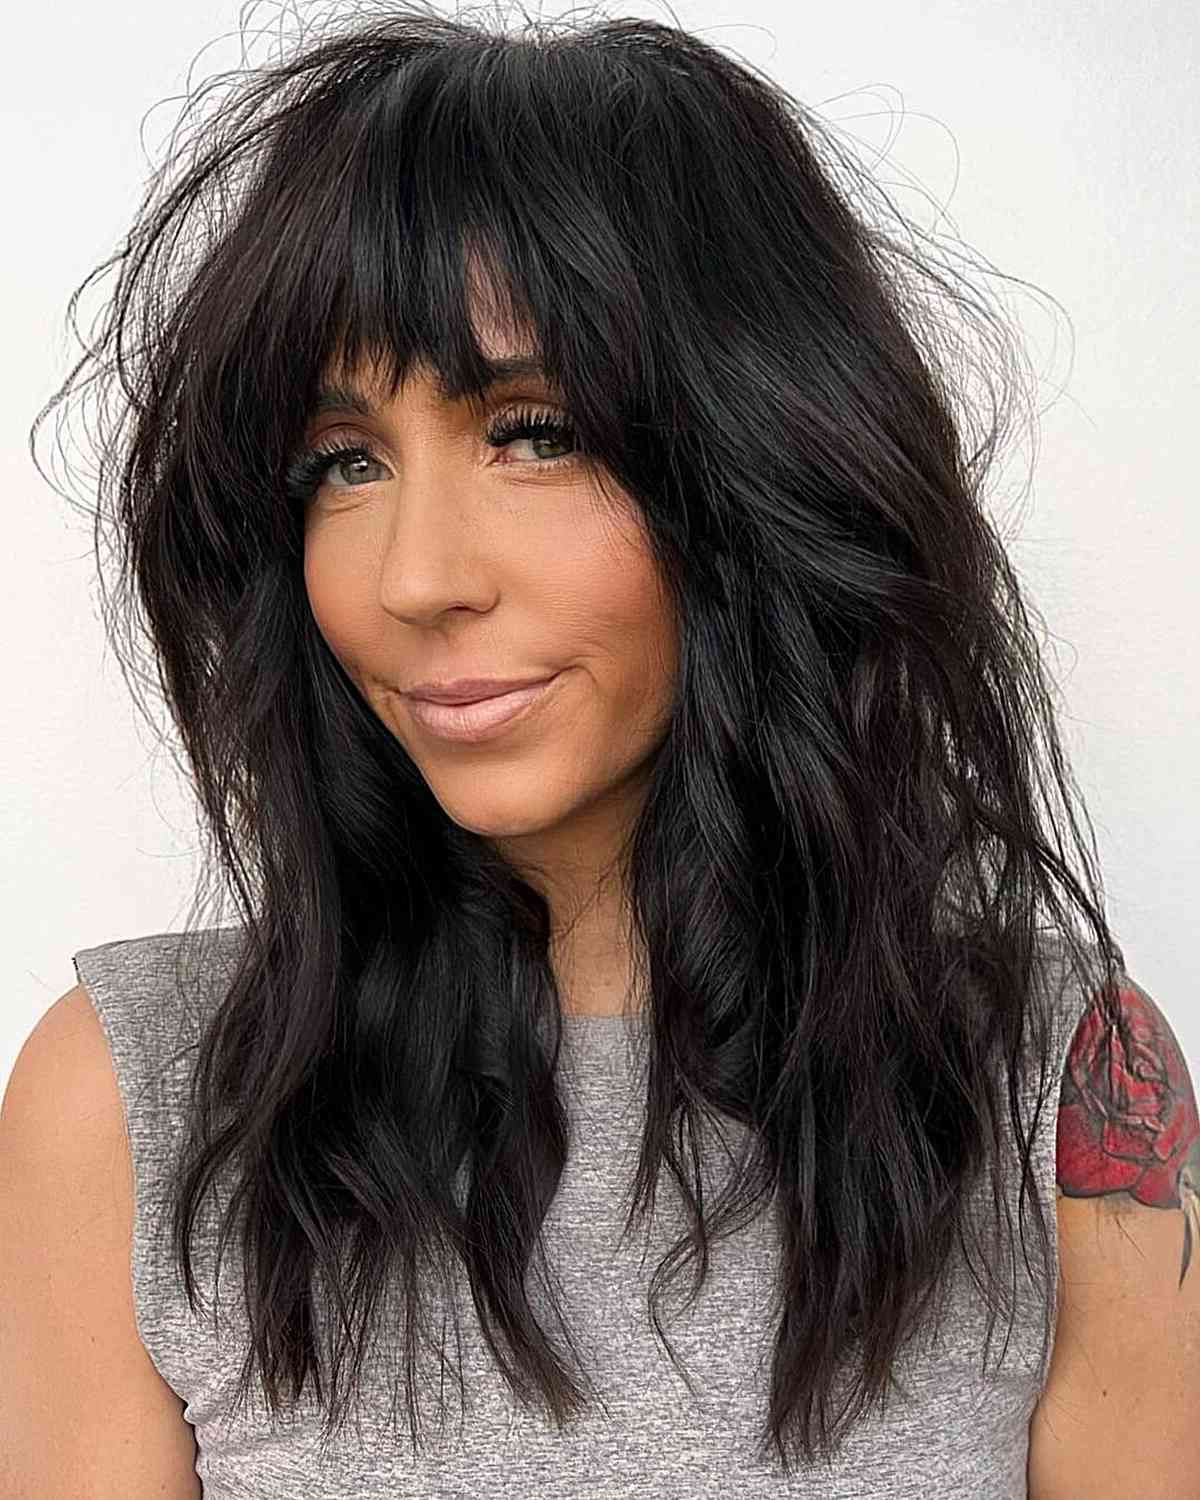 44 Trendy Medium Layered Haircuts With Bangs For Latest Dip Dye Medium Layered Hair With Bangs (View 11 of 18)